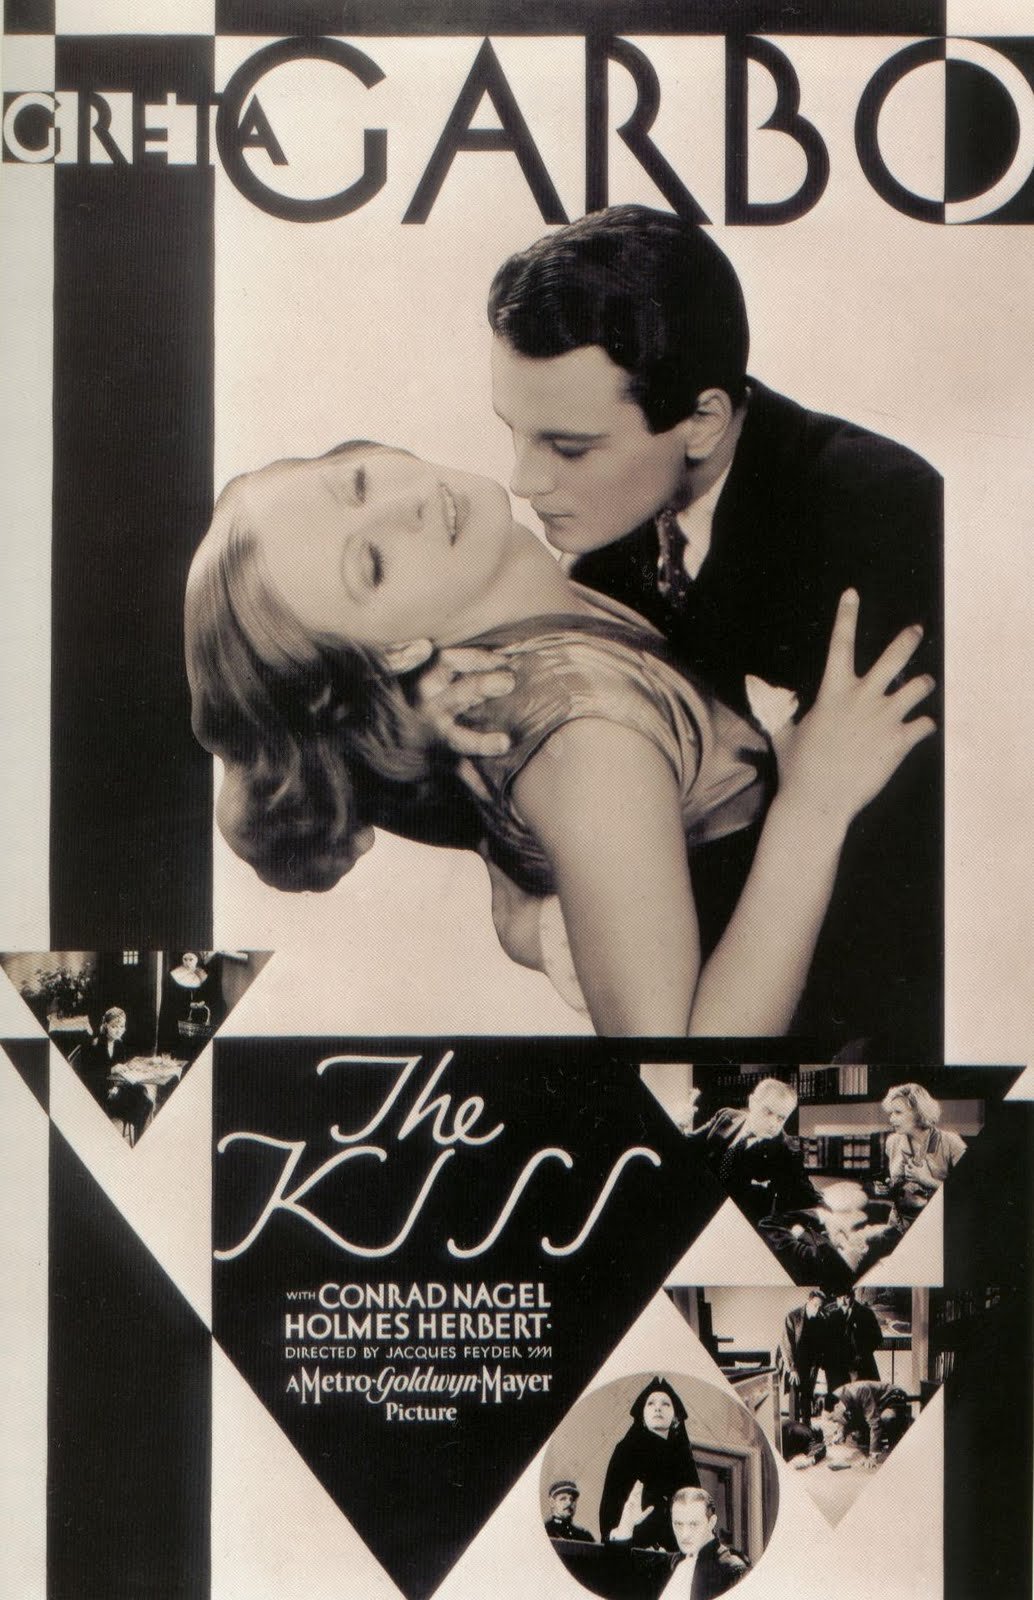 Poster of the movie The Kiss